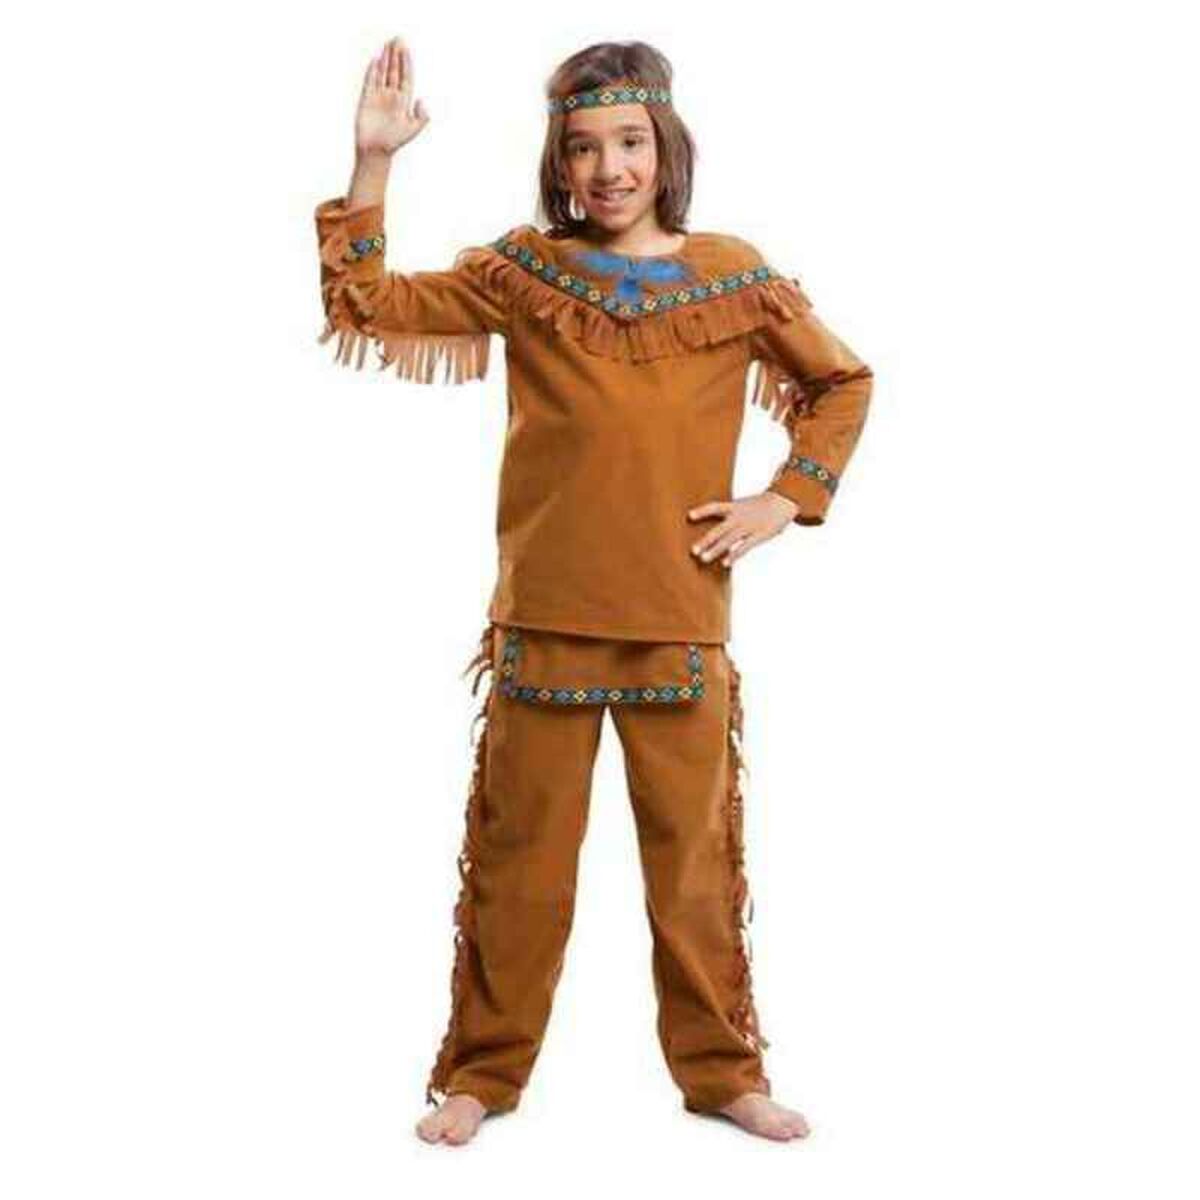 Costume for Children My Other Me American Indian - Little Baby Shop